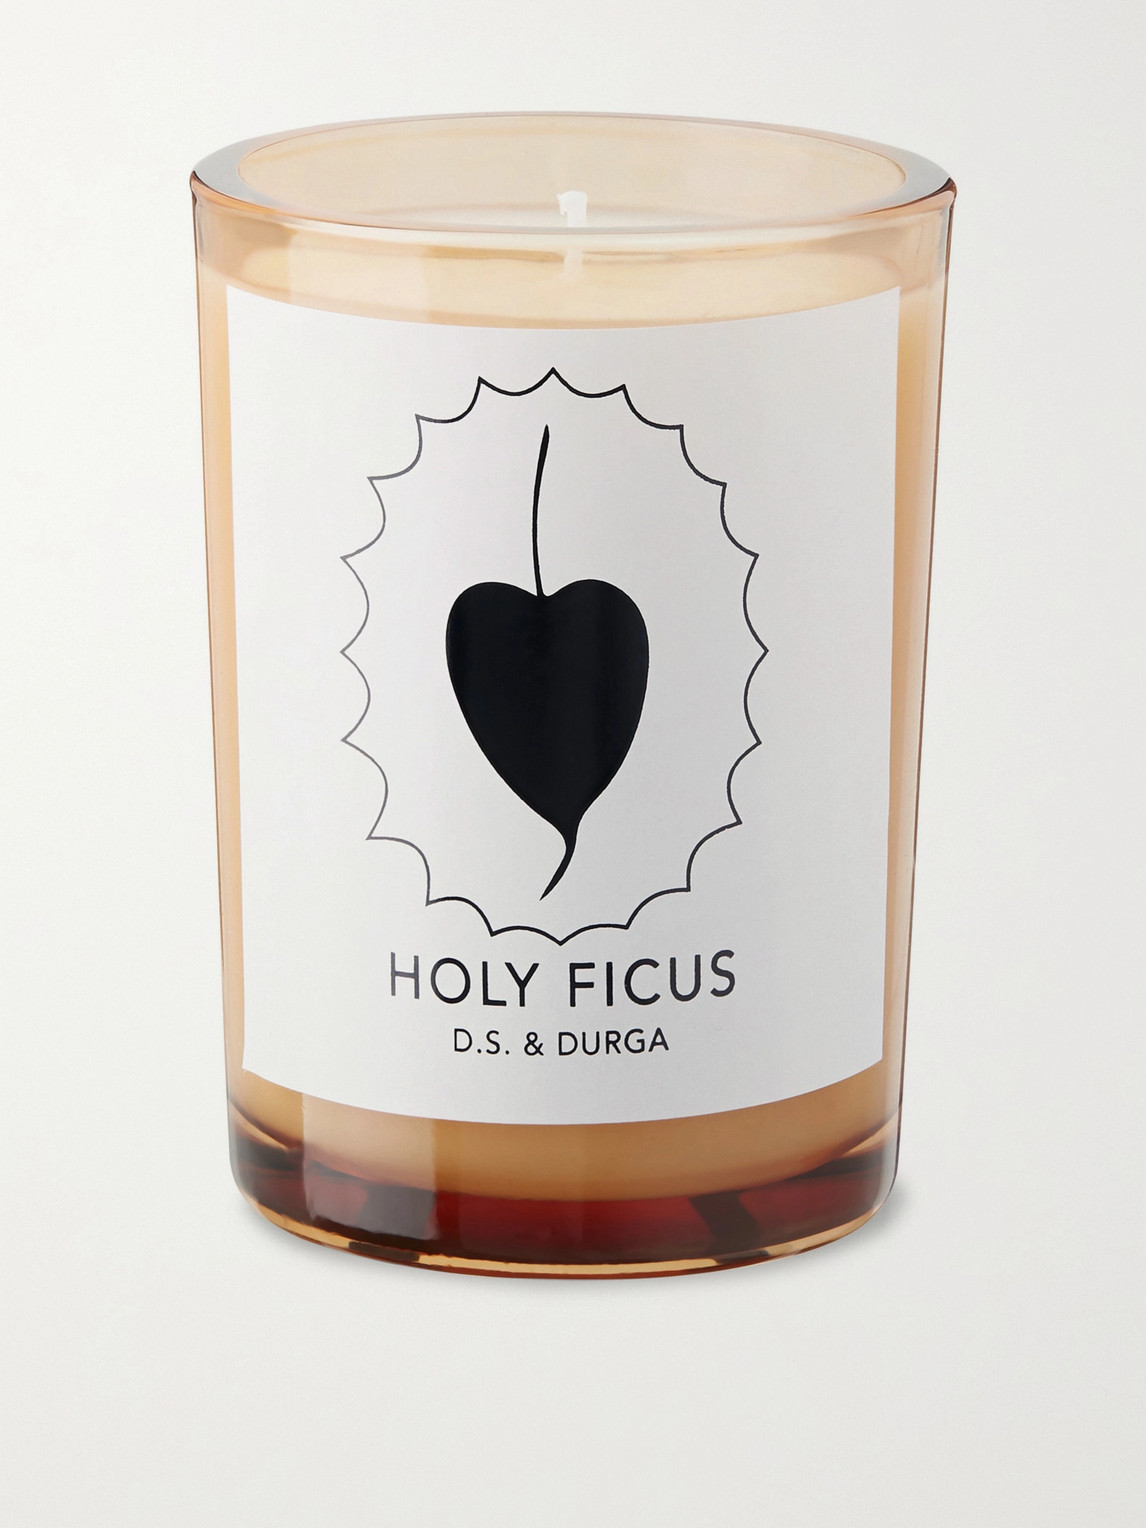 D.s. & Durga Holy Ficus Scented Candle, 200g In Colorless